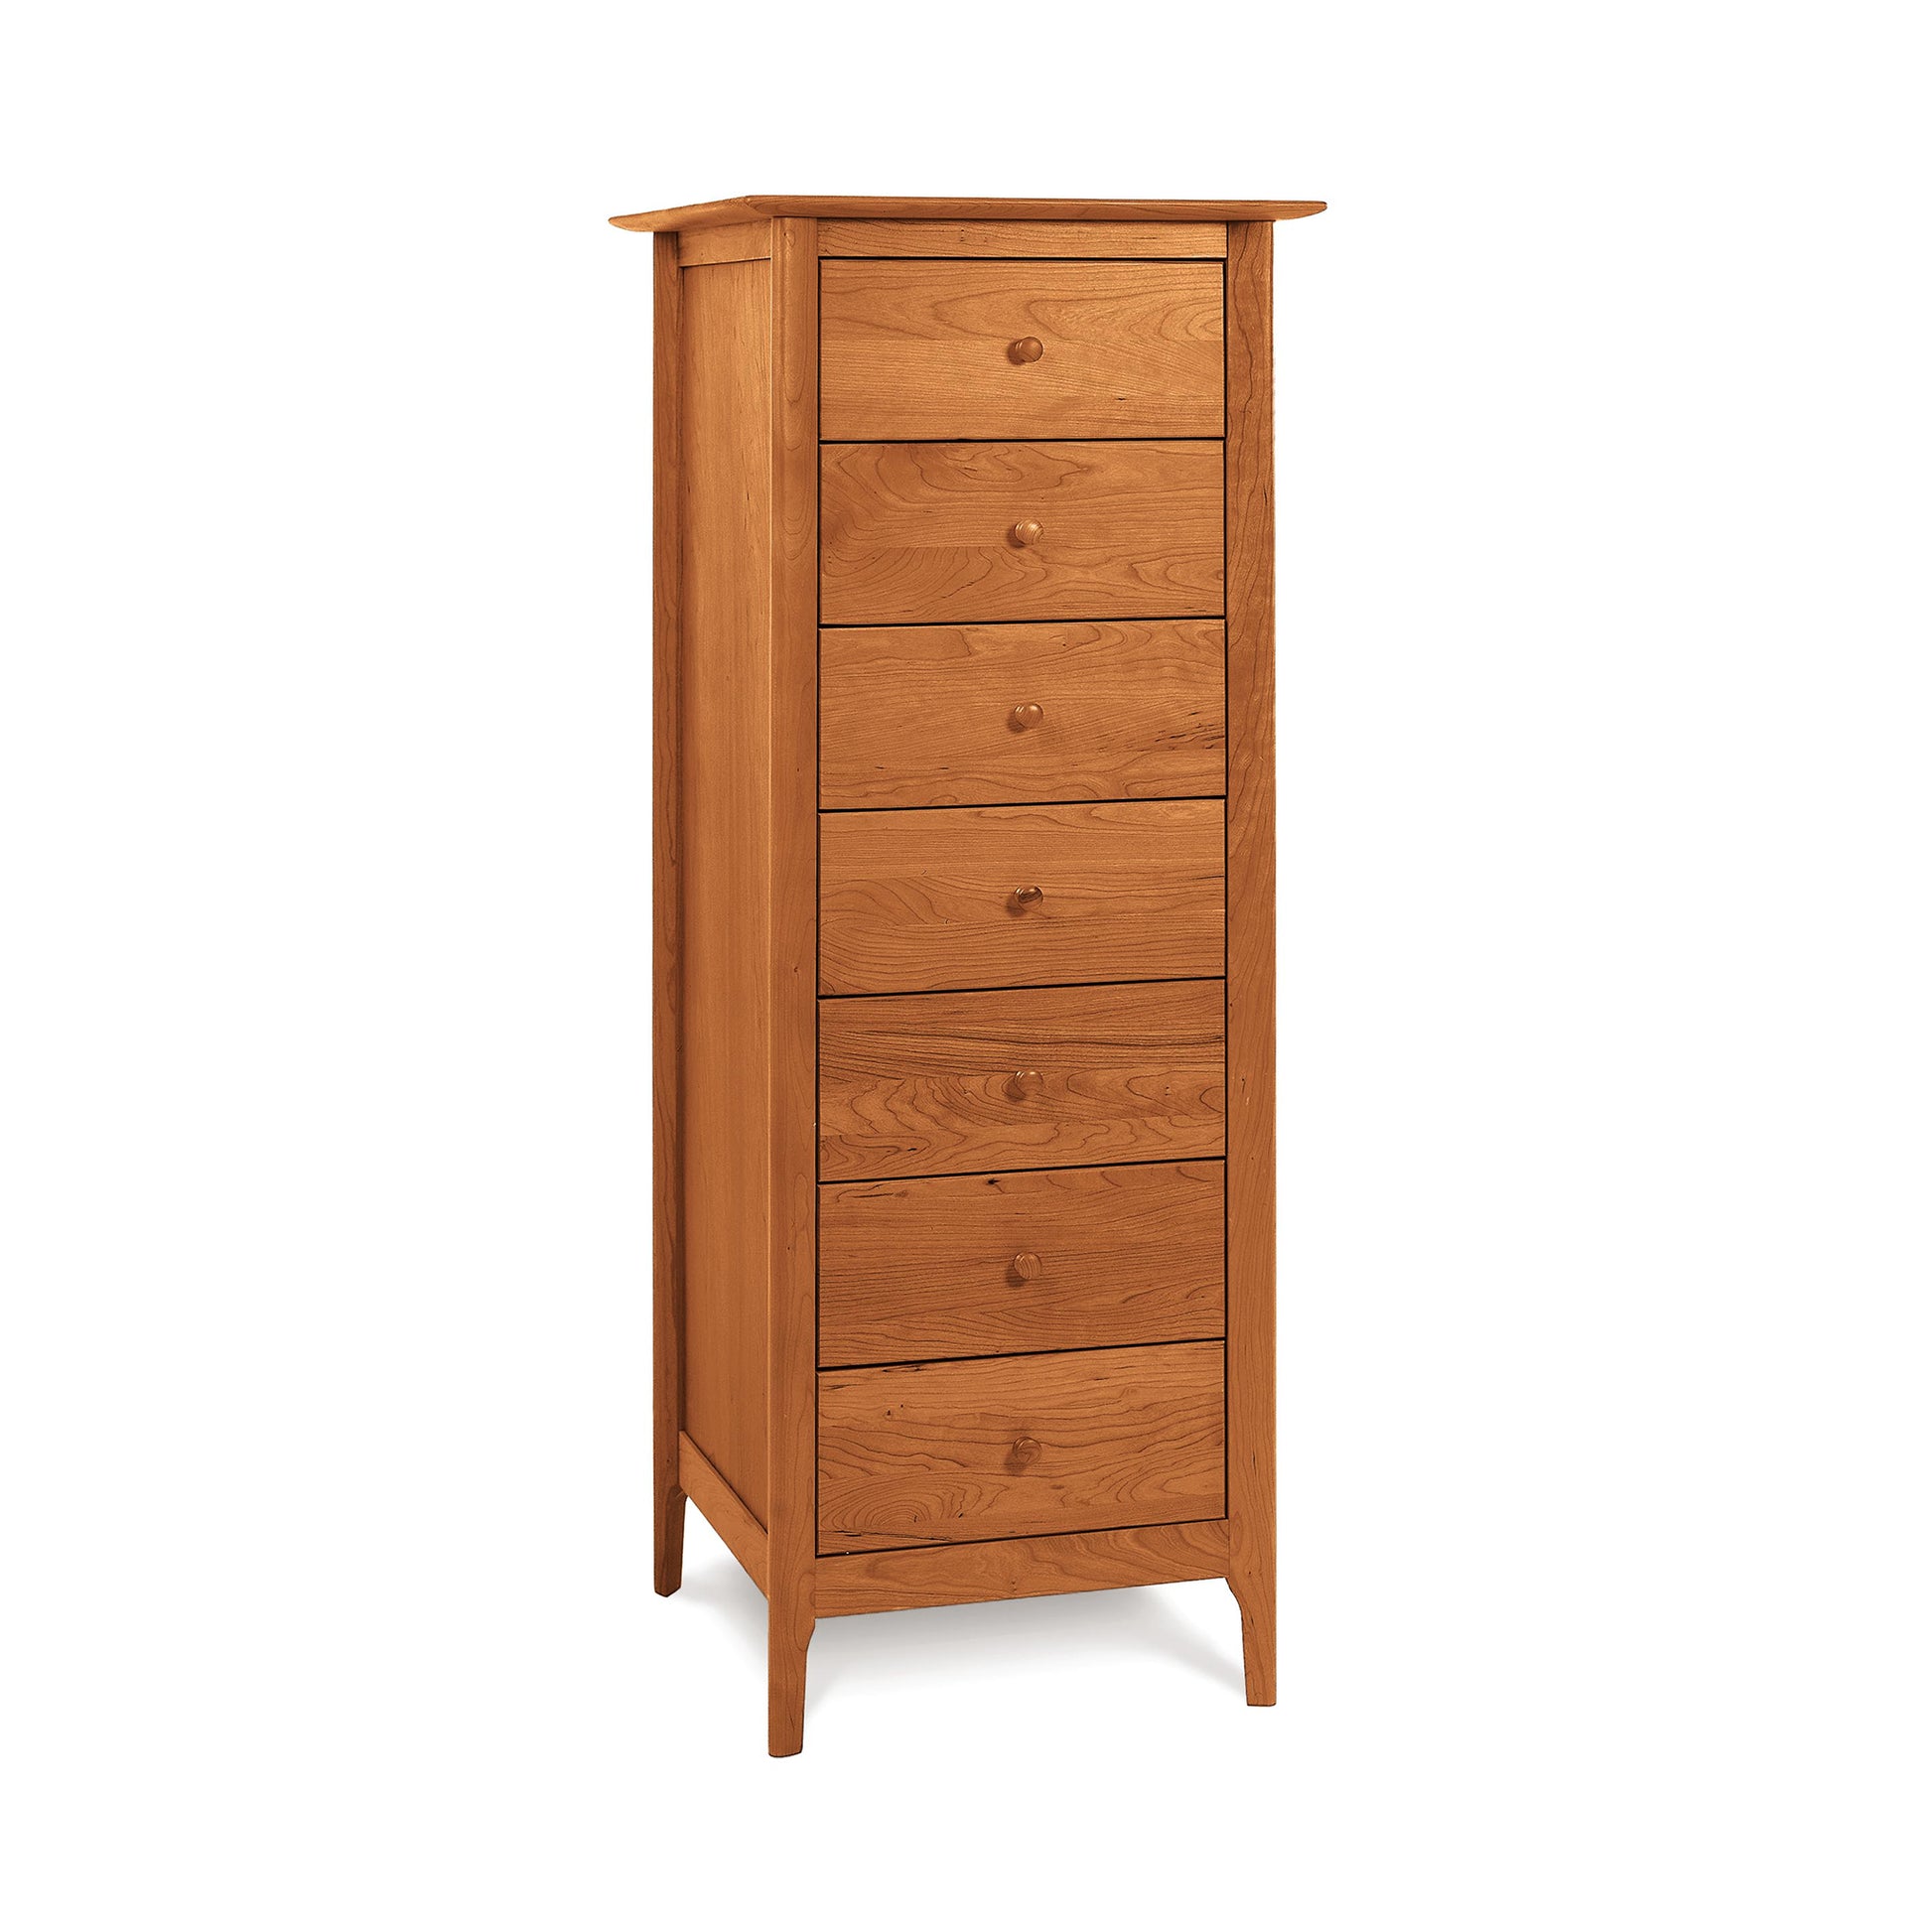 A tall Copeland Furniture Sarah 7-Drawer Lingerie Chest with seven pull-out drawers, each with a single round knob, standing against a plain white background.